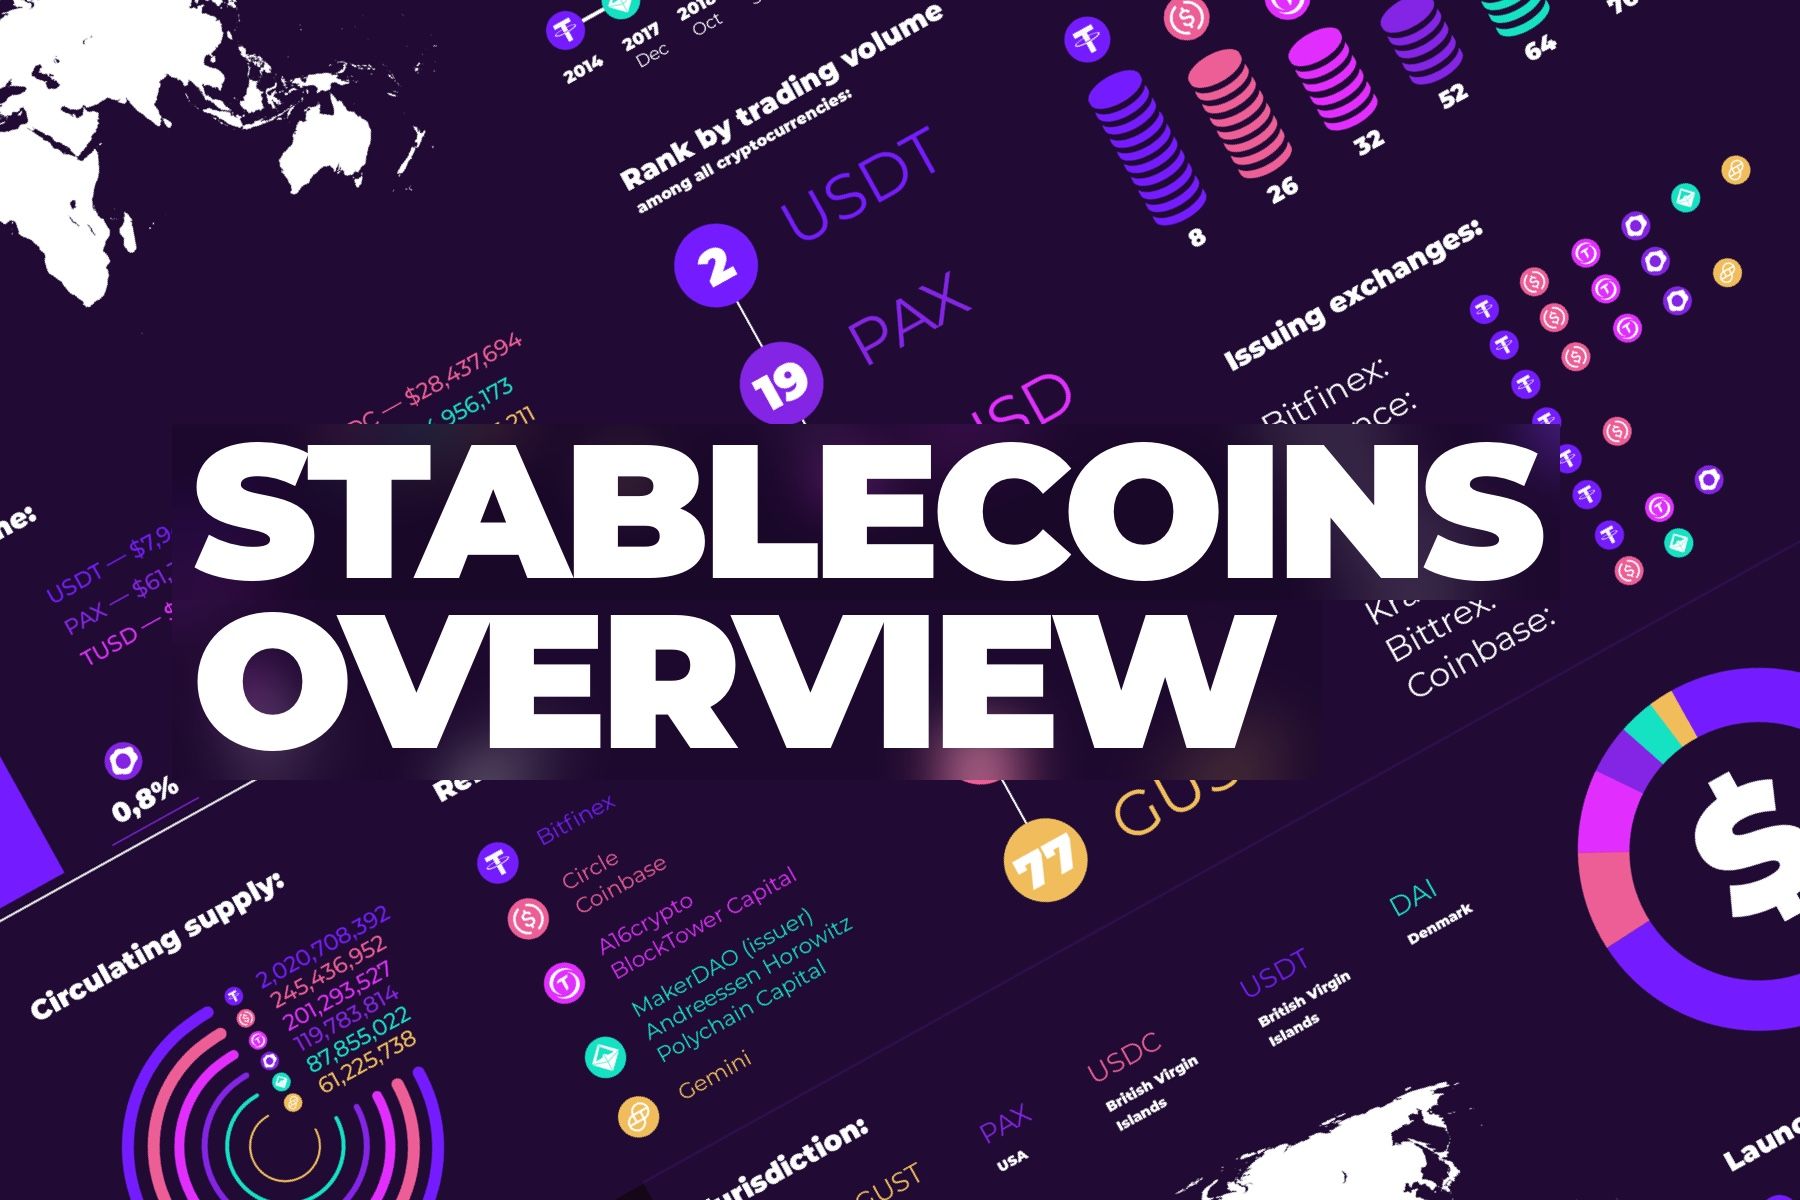 Stablecoins: what they are, market capitalisation, ranking, exchanges, issuers